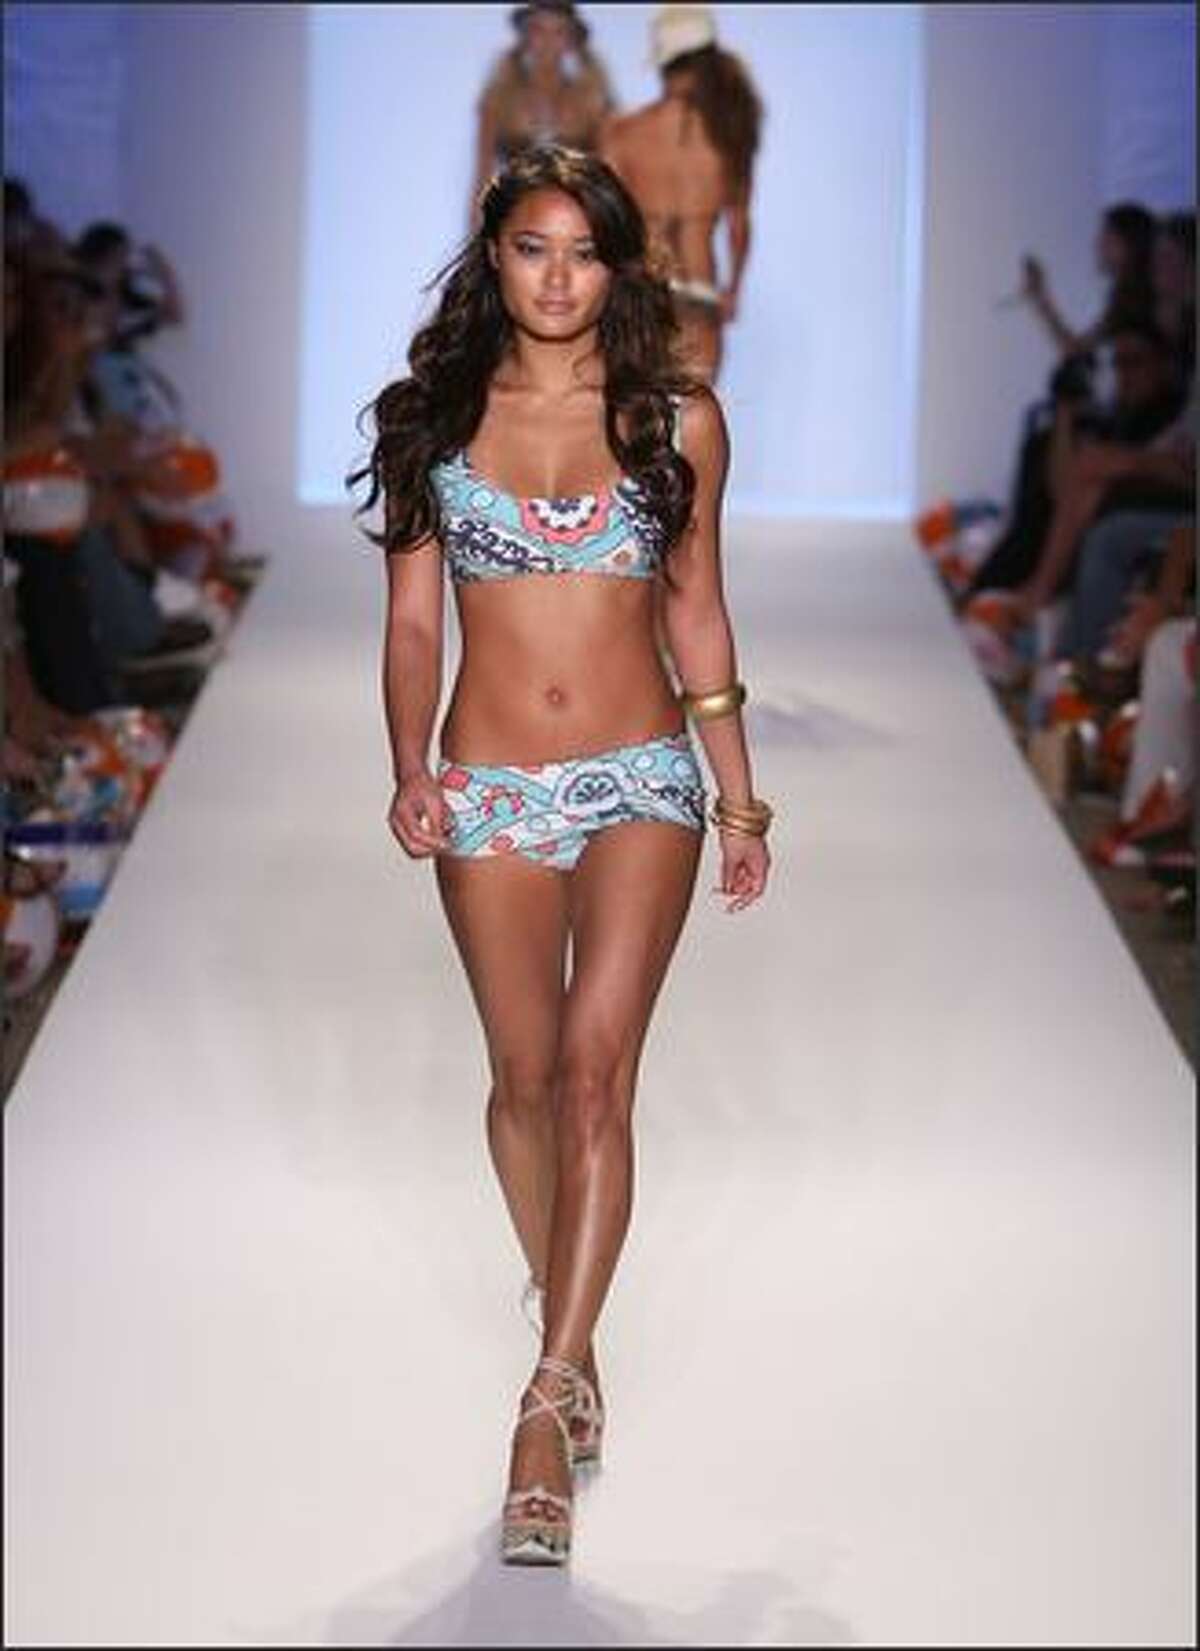 MIAMI BEACH, FL - JULY 13: A model walks down the runway at the Ashley Paige swimwear fashion show during "Mercedes Benz Fashion Week: Miami Swim" in the Cabana Grande tent at the Raleigh Hotel on July 13, 2007 in Miami Beach. (Photo by Mark Mainz/Getty Images for Ashley Paige)